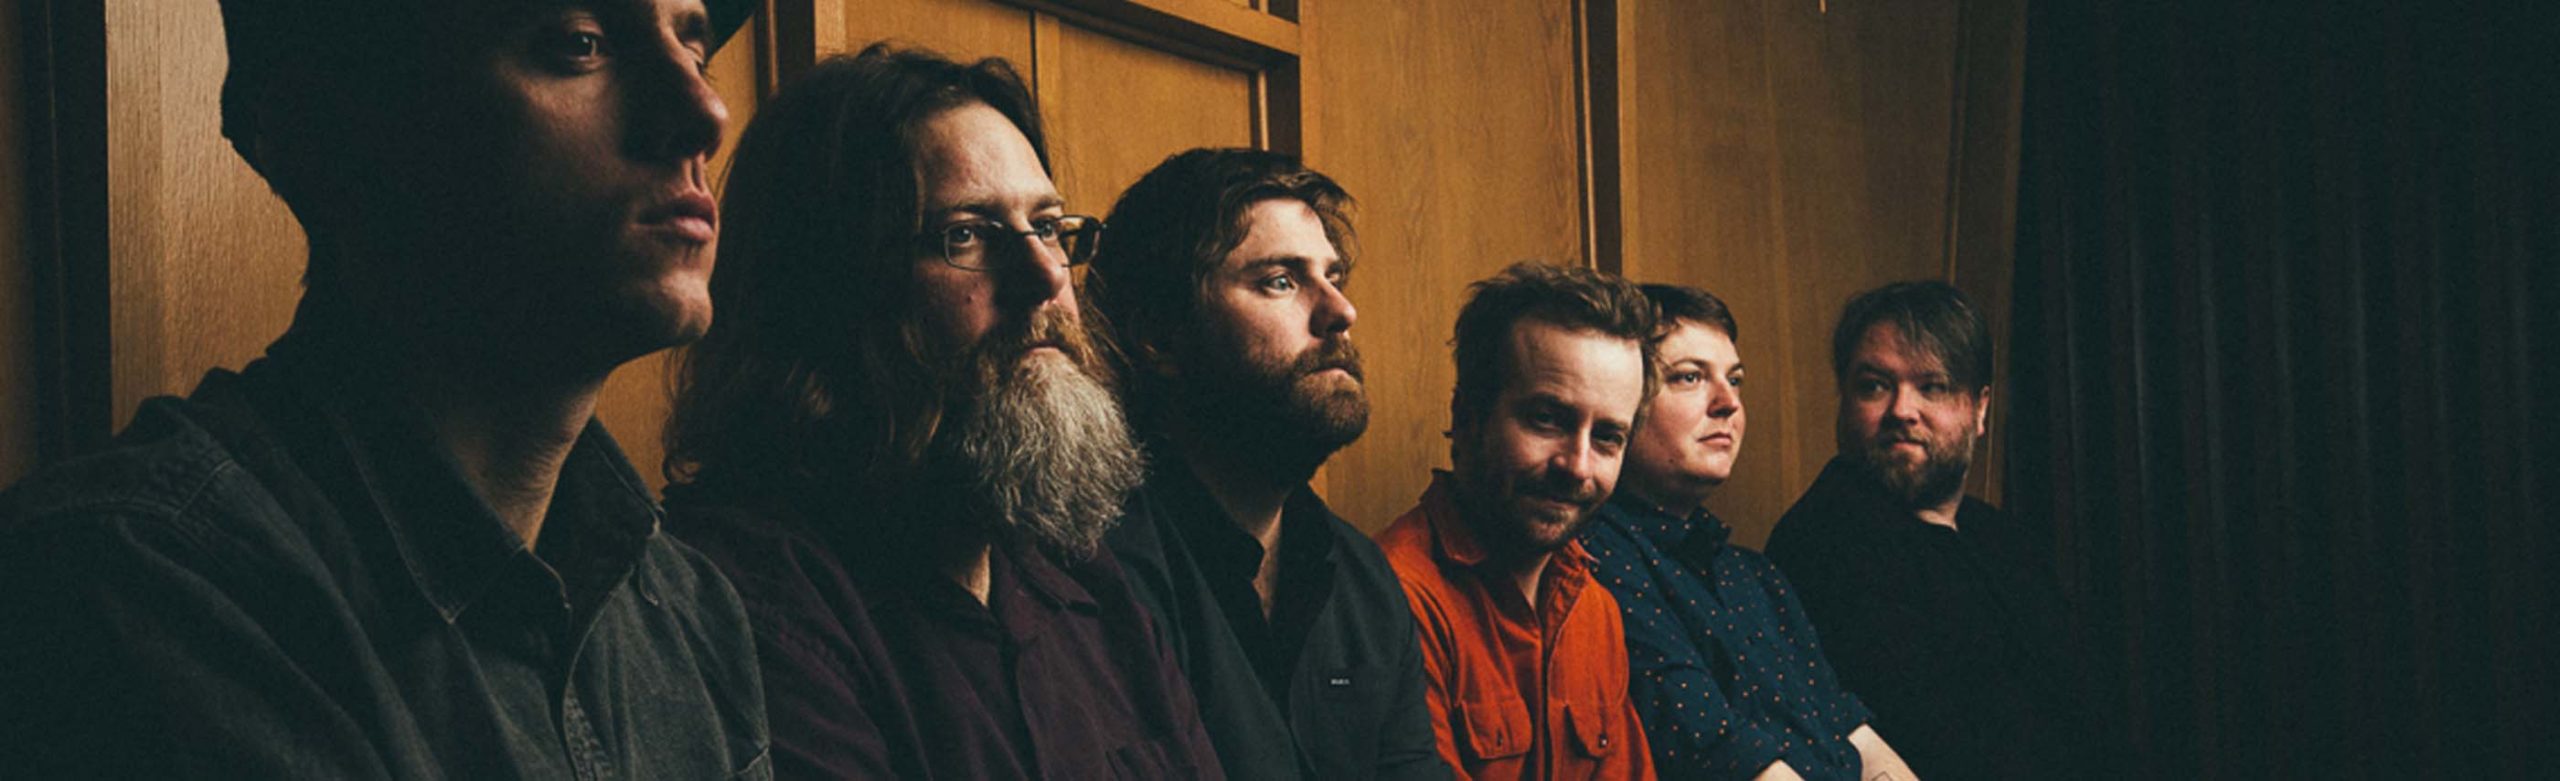 GIVEAWAY: Trampled by Turtles with Lil Smokies Premium Box Seats Image